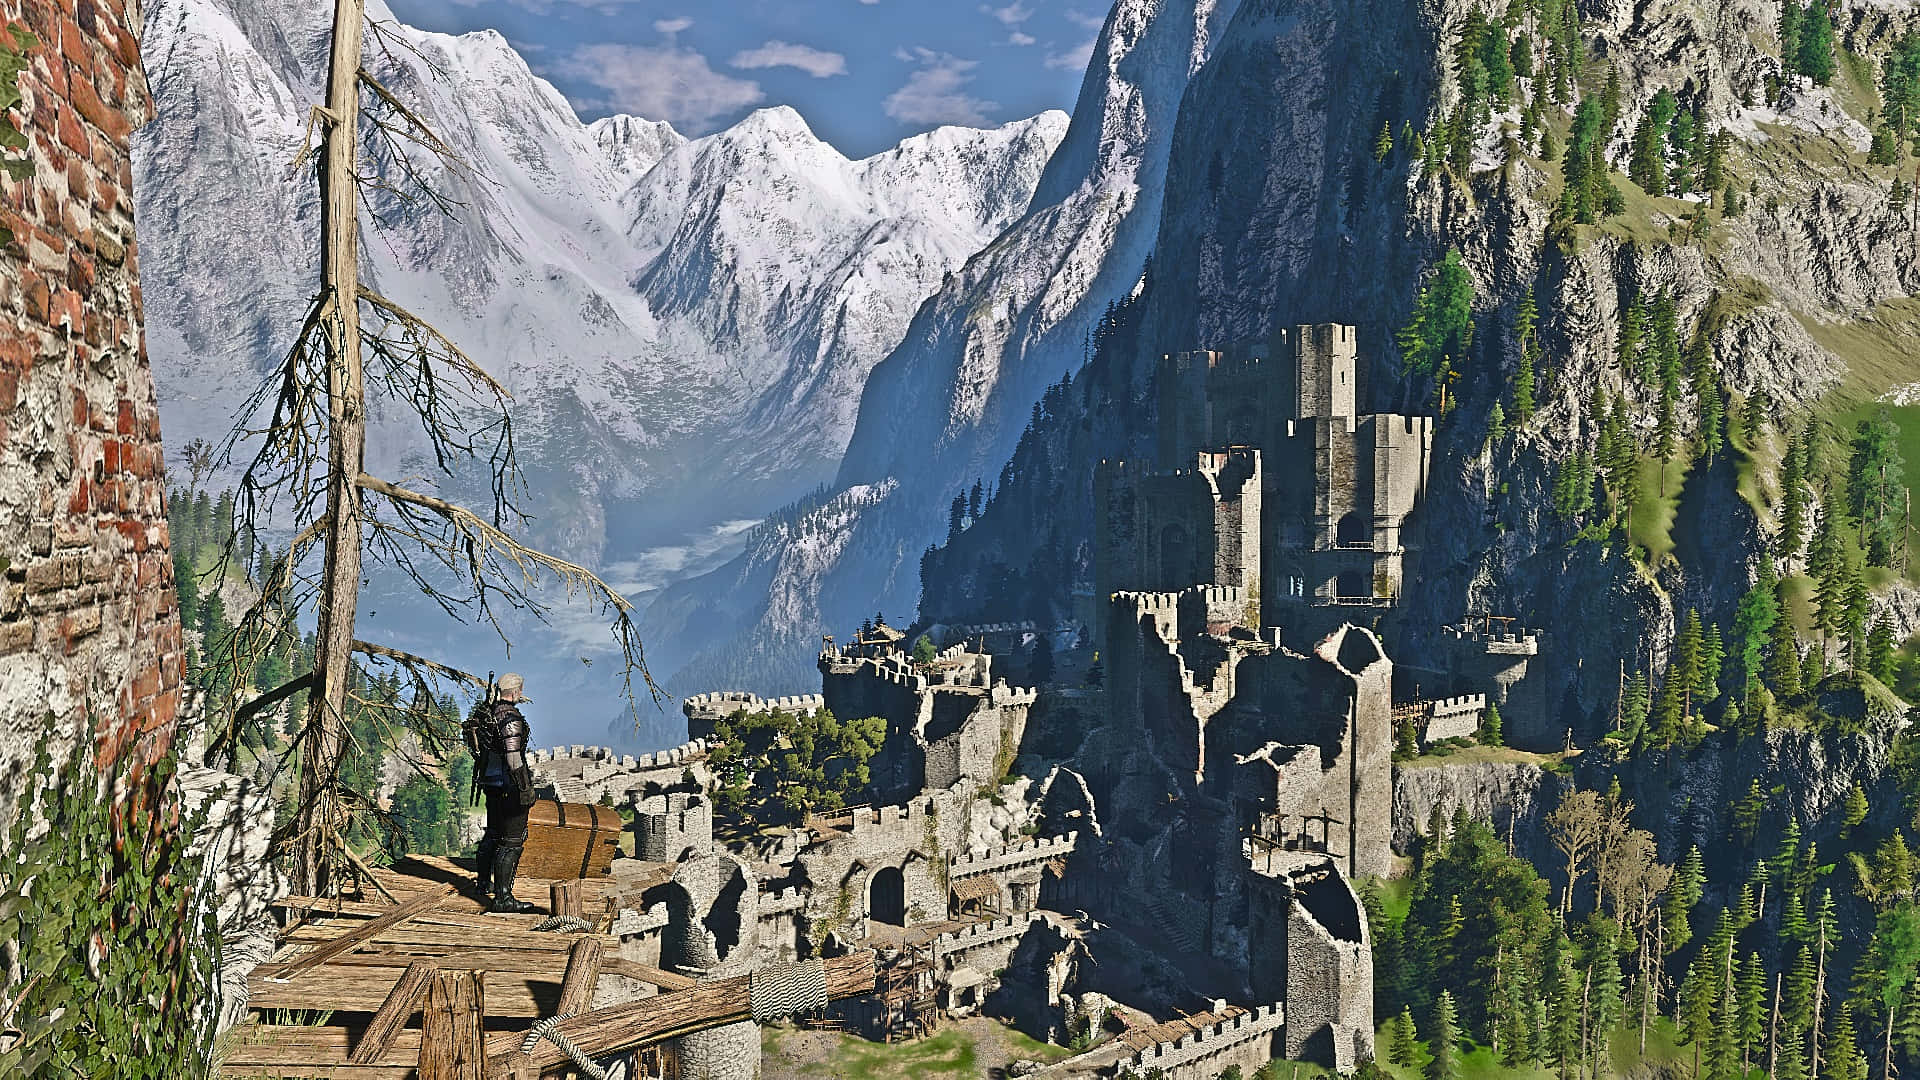 Kaer_ Morhen_ Witcher_ Fortress_ Scenery Wallpaper